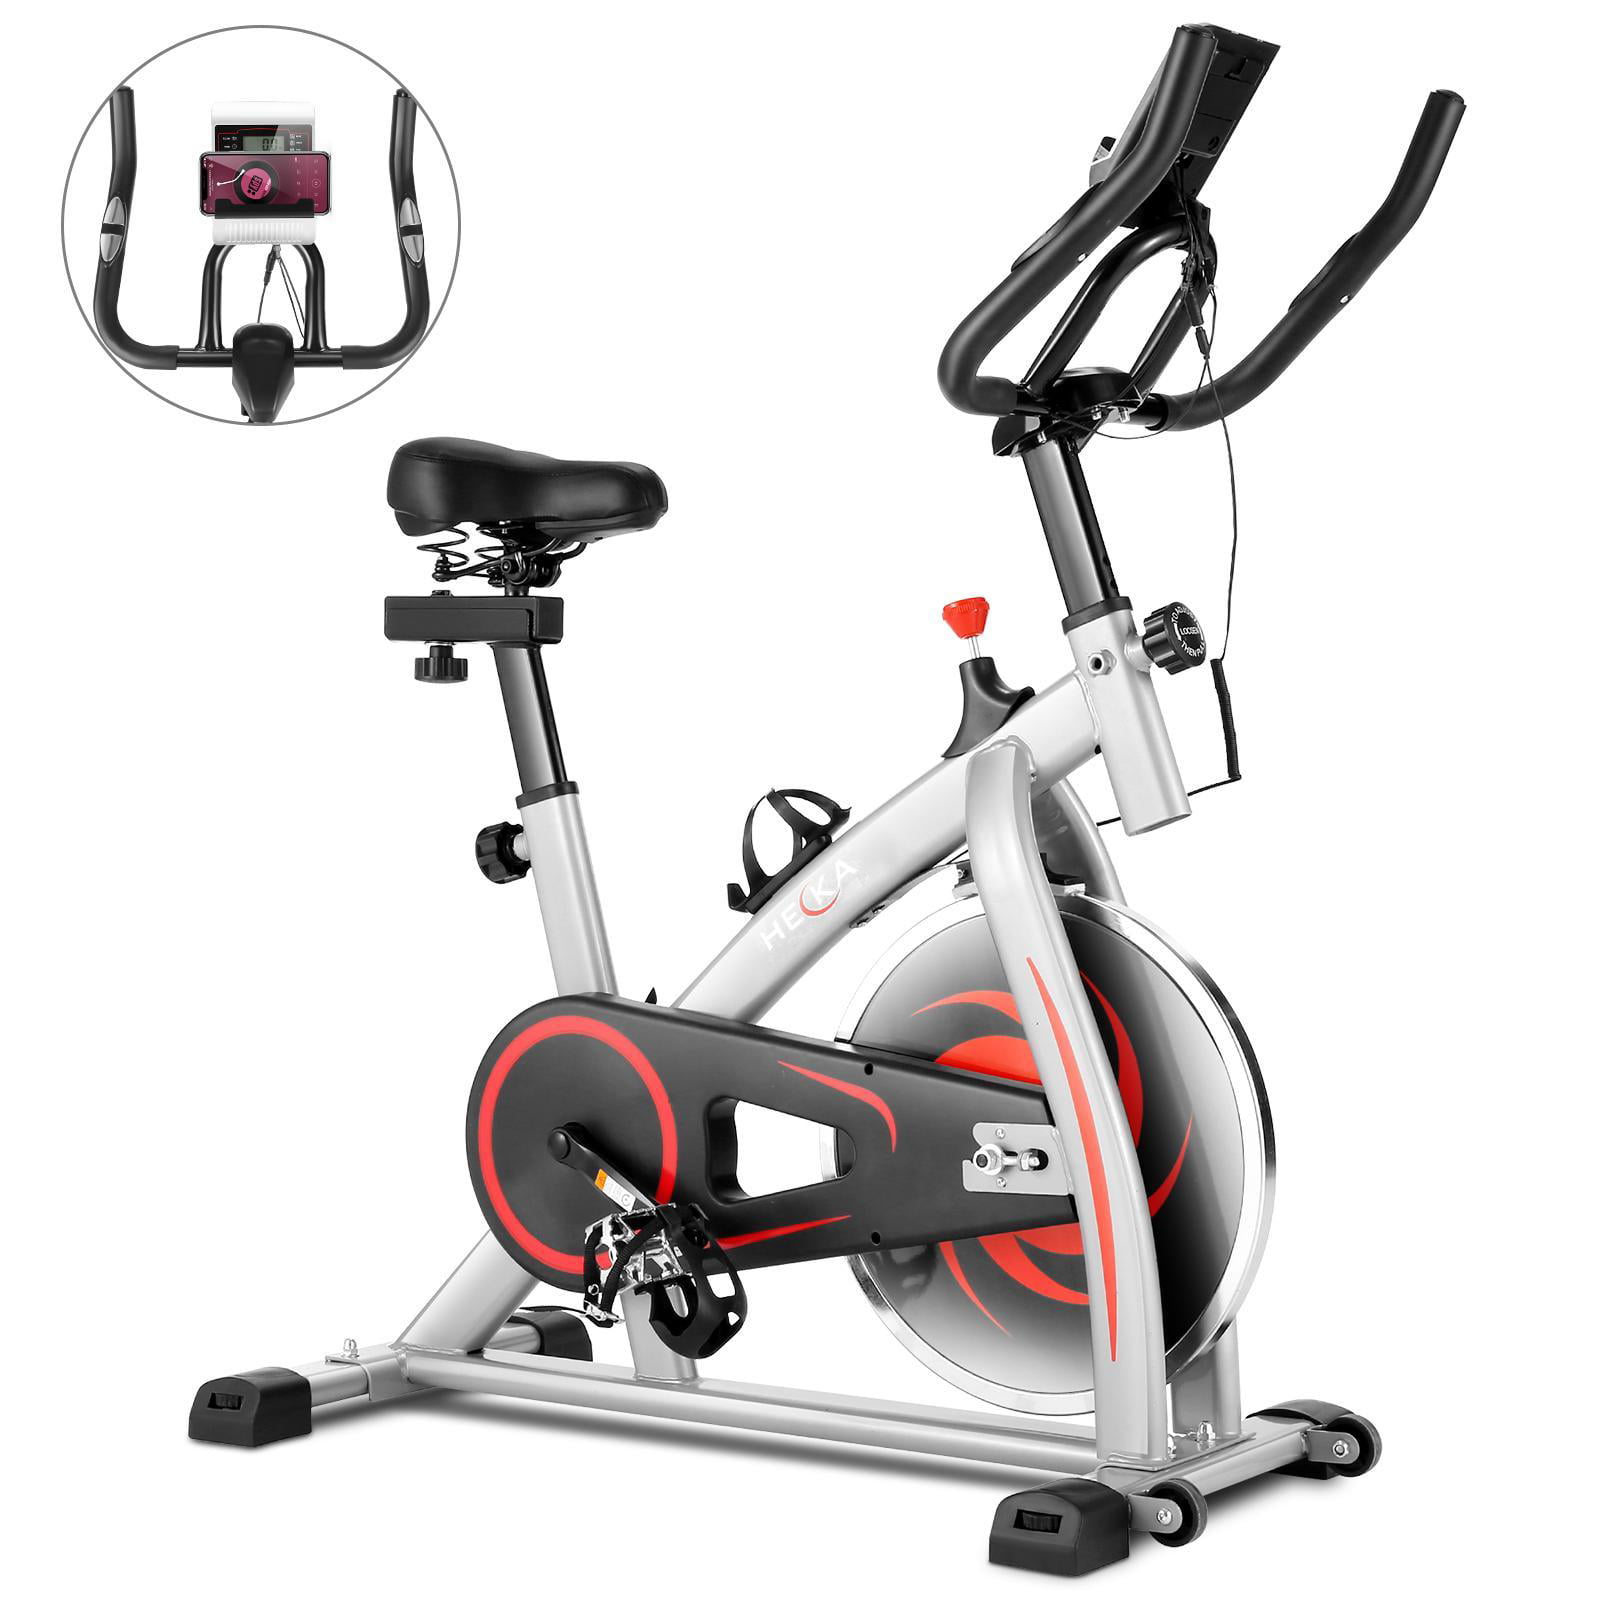 Details about   Fitness Indoor Exercise Bike Home Gym Cycling Bicycle Equipment  Body Workout 